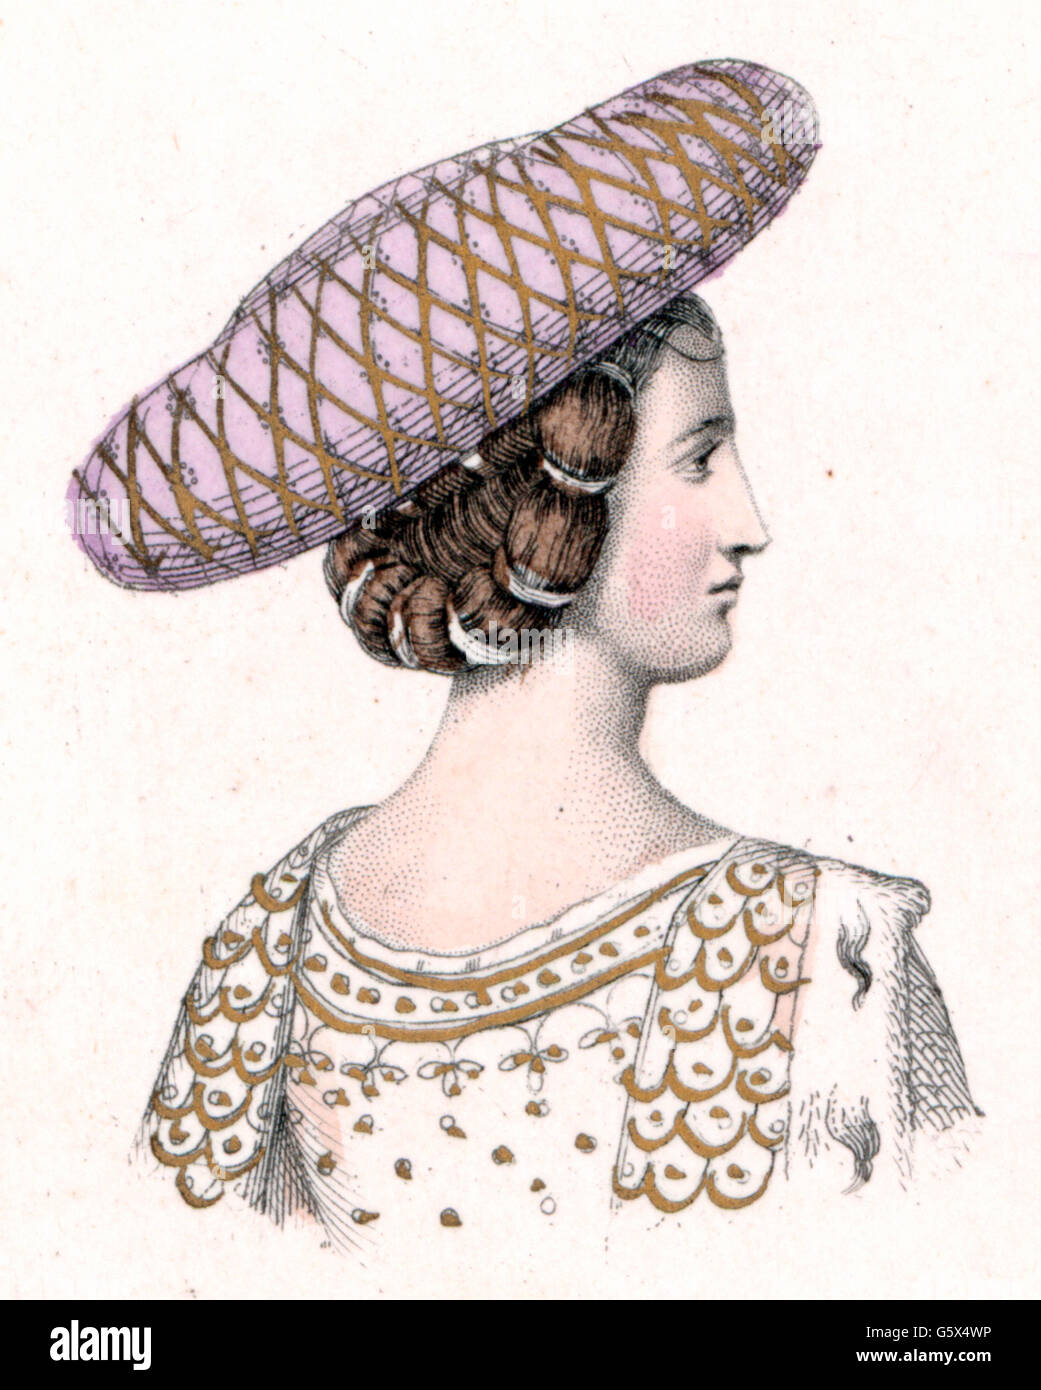 Middle Ages, people, woman with hat, Italy, late 14th century, coloured engraving, 19th century, 14th century, 19th century, Middle Ages, medieval, mediaeval, graphic, graphics, Italy, fashion, clothes, outfit, outfits, accessory, accessories, headpiece, headpieces, hat, hats, ladies' fashion, hair style, hairstyle, hairdo, haircut, hair styles, hairstyles, haircuts, hair, portrait, profile, side-face, profiles, fashion for women, women's clothing, woman, women, coloured, colored, historic, historical, woman, women, female, people, Additional-Rights-Clearences-Not Available Stock Photo